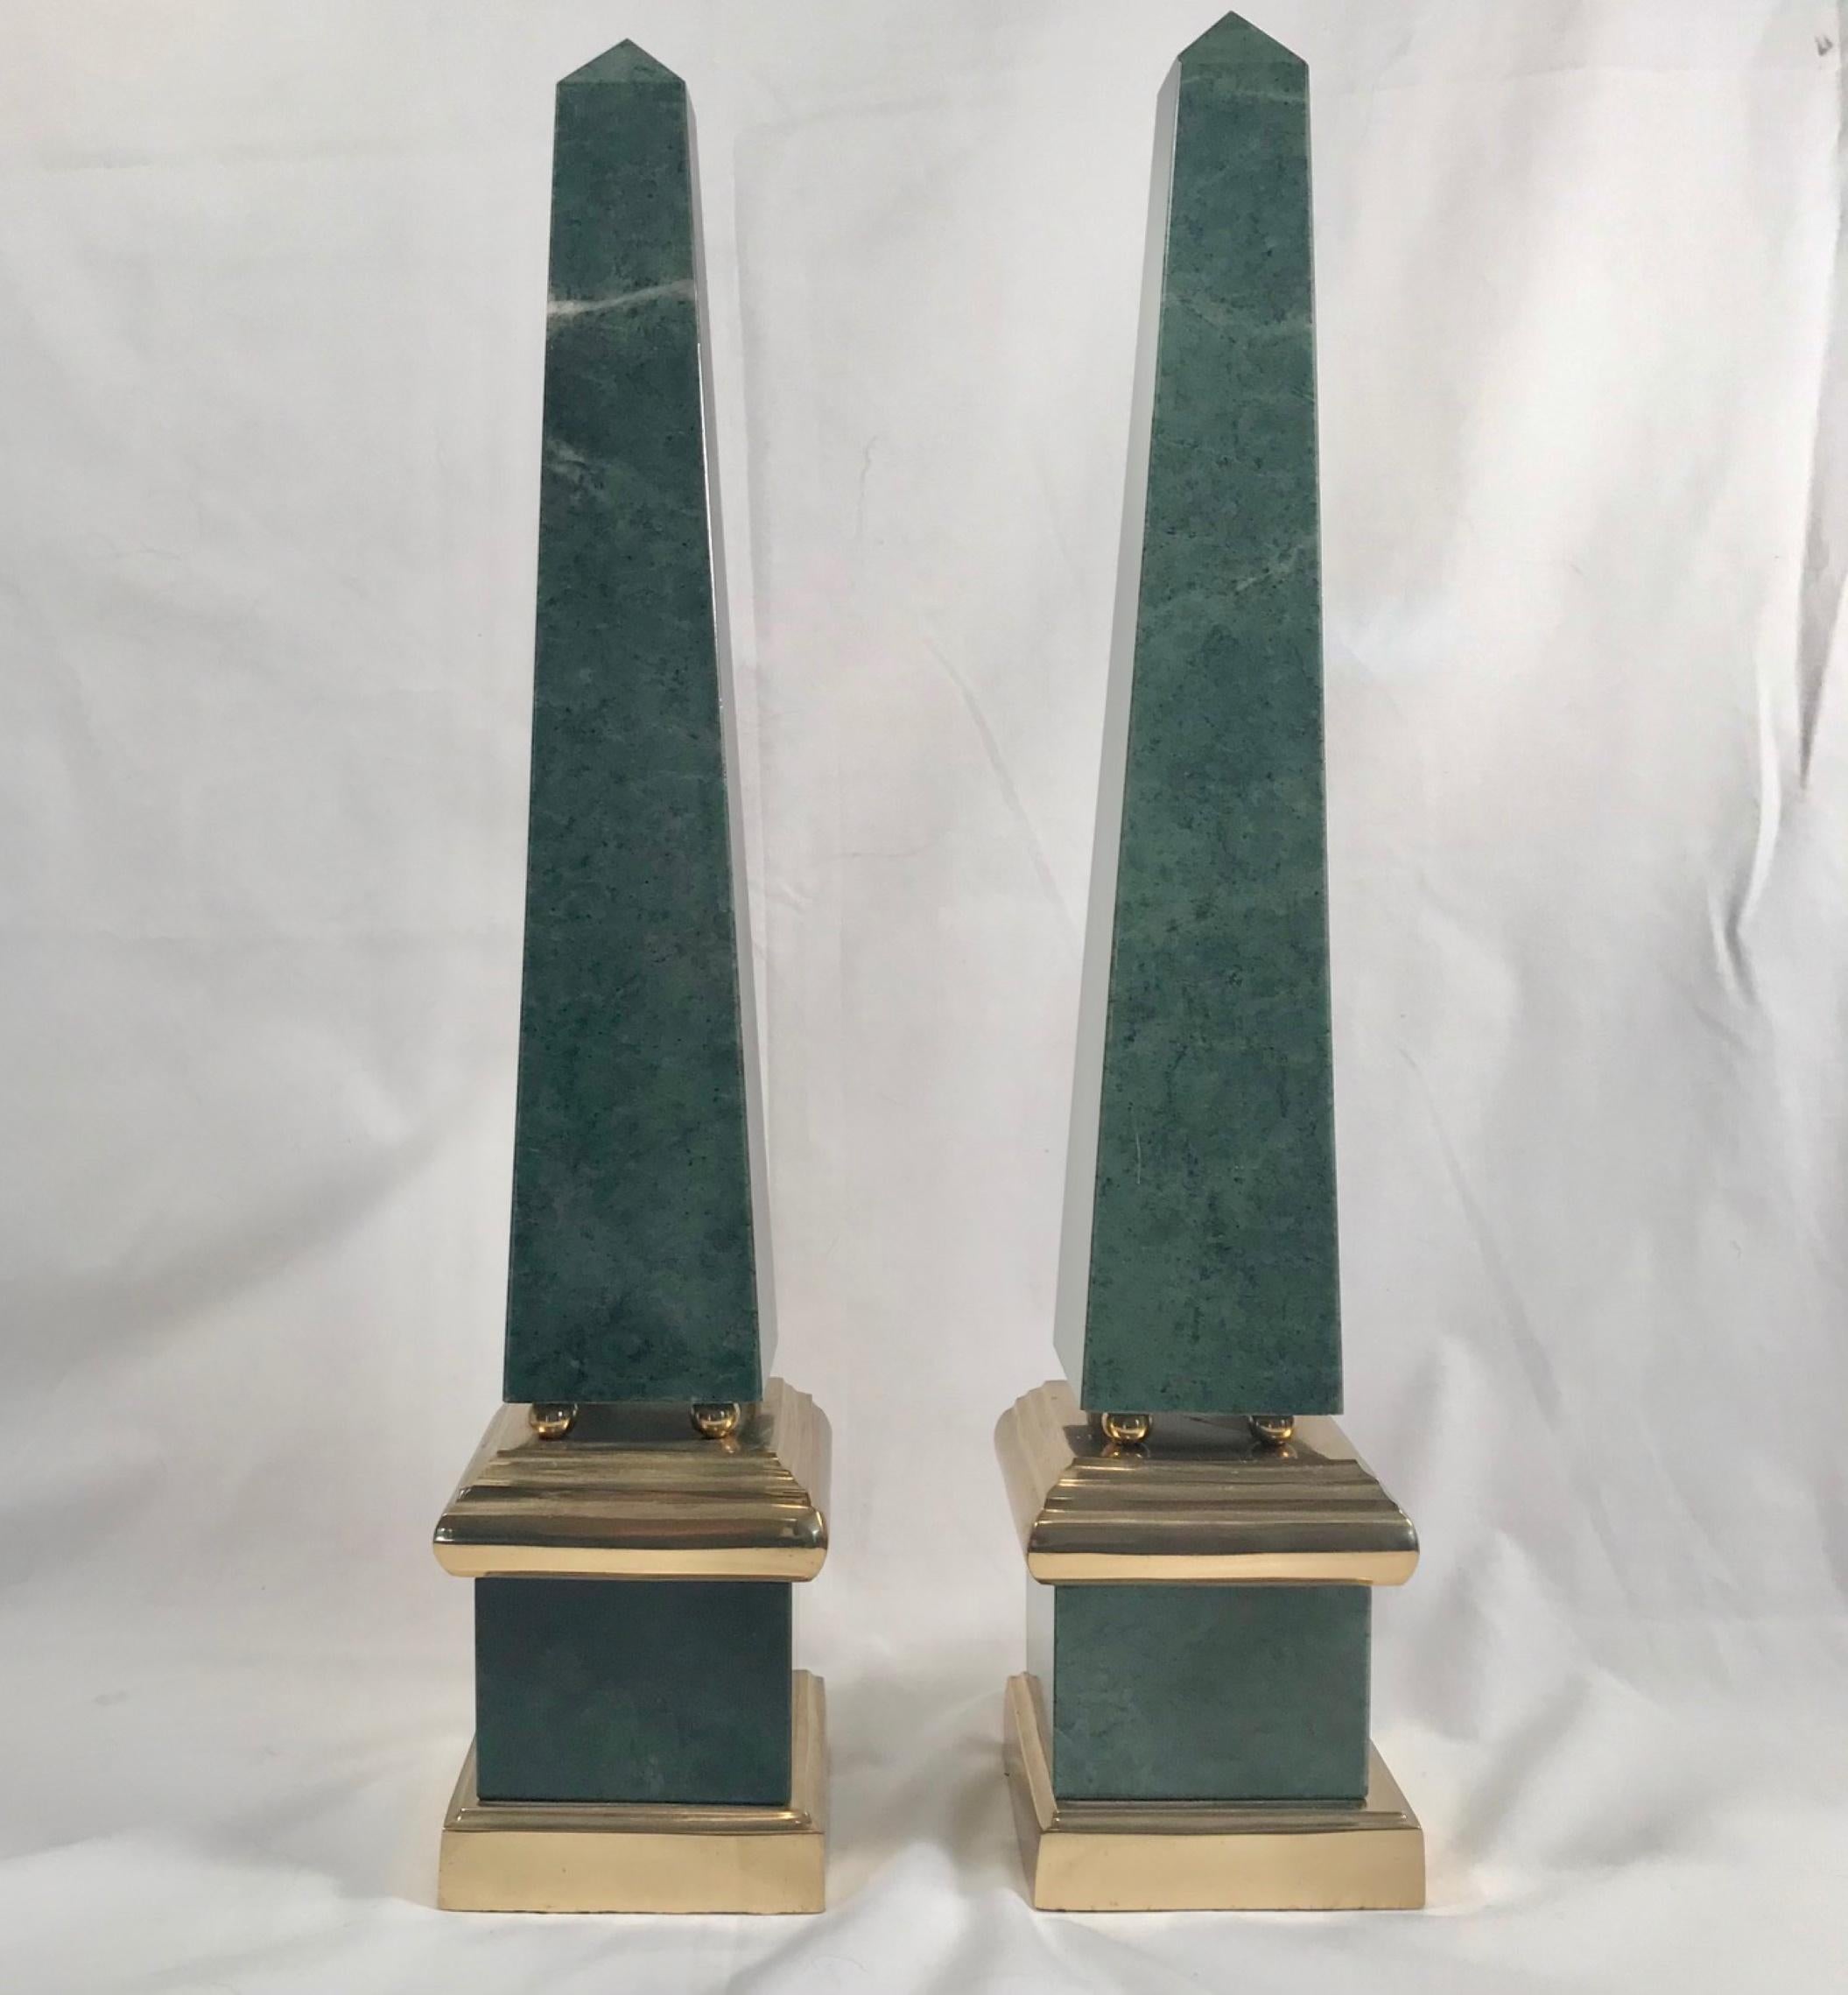 Pair of vintage large green obelisks, brass mounted

The matching pair of impressive green marble (Antico Verde) obelisks are created in large scale and mounted in brass. A brass base supports rich green veined marble that rises to meet a brass